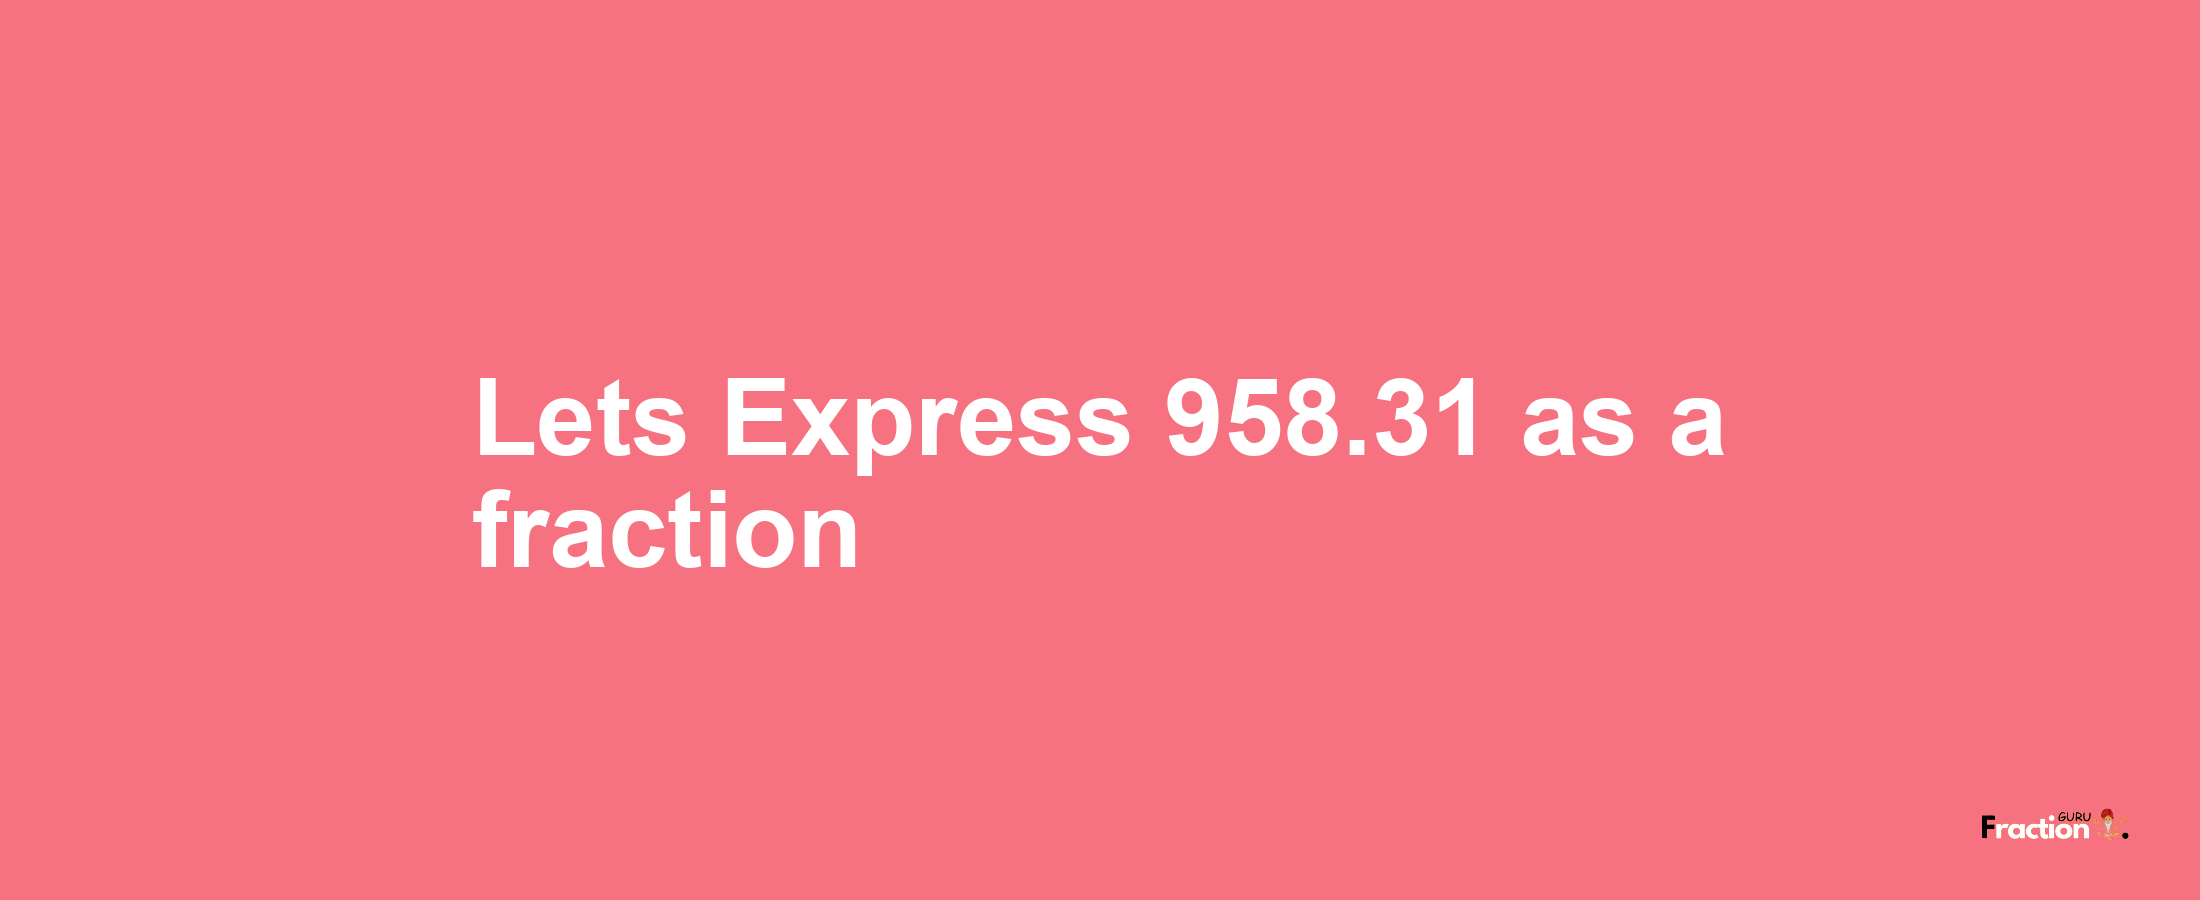 Lets Express 958.31 as afraction